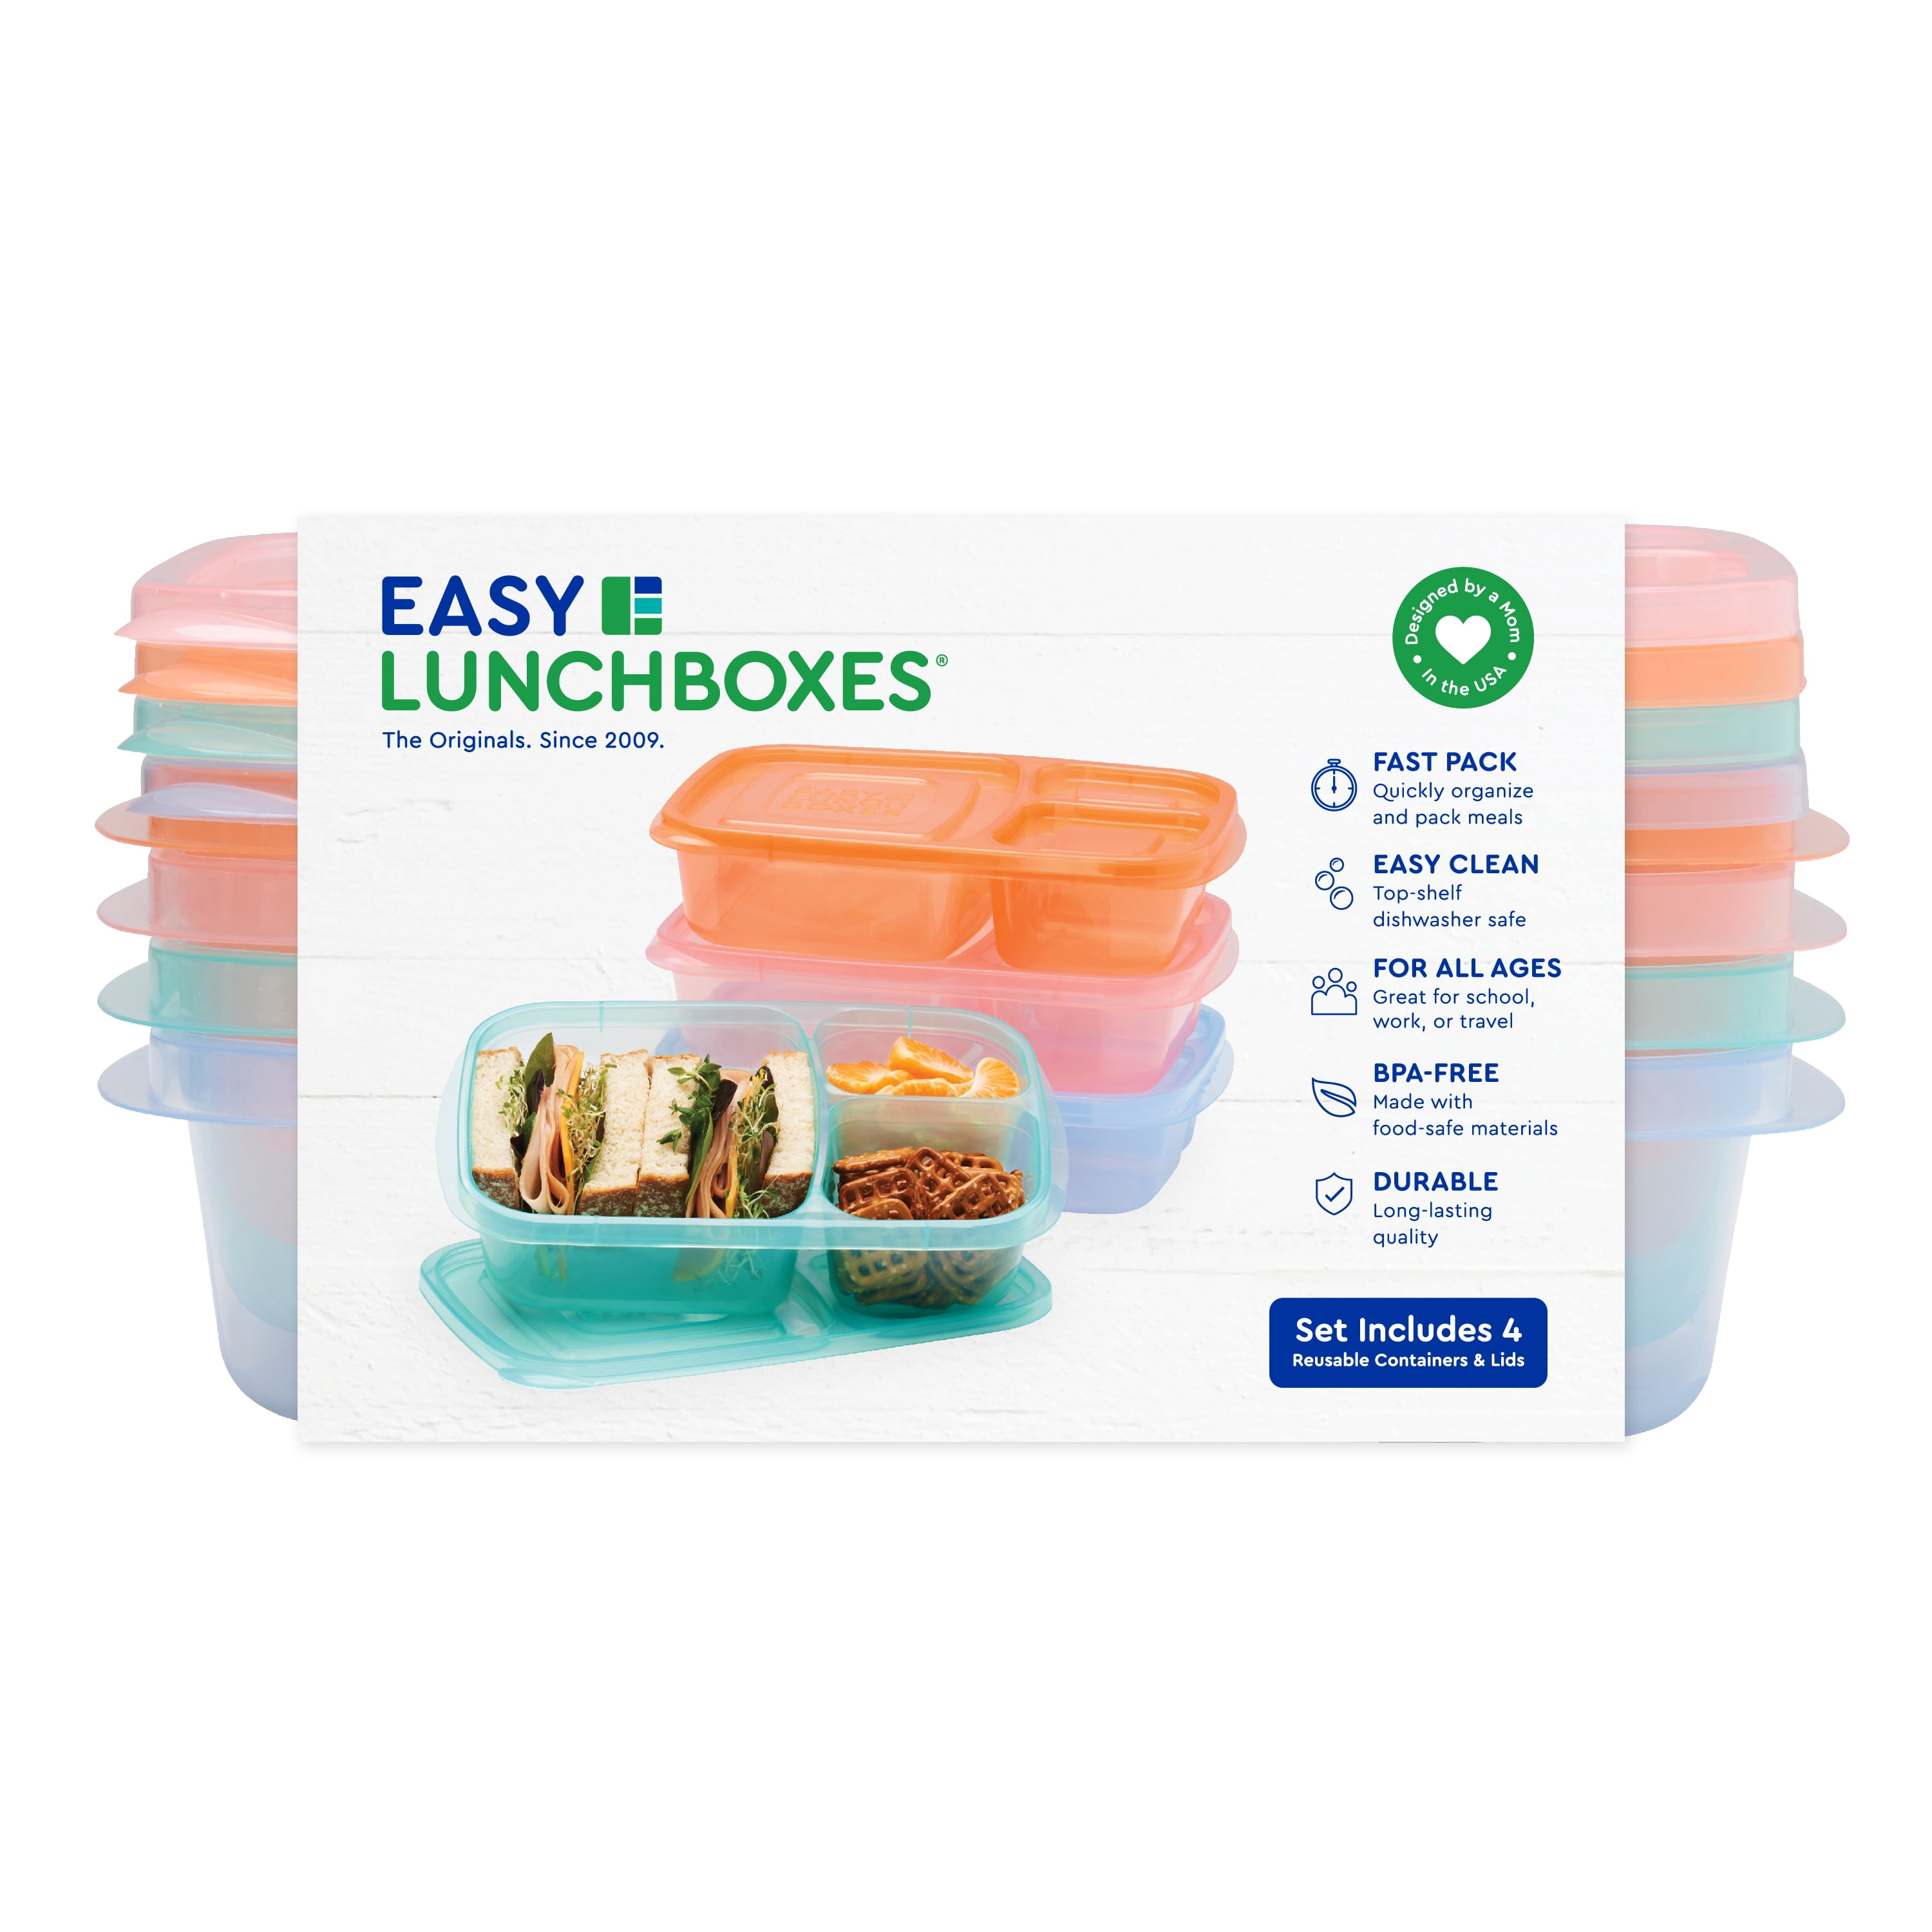 The Best Lunch Containers for Kids - The Organized Mom